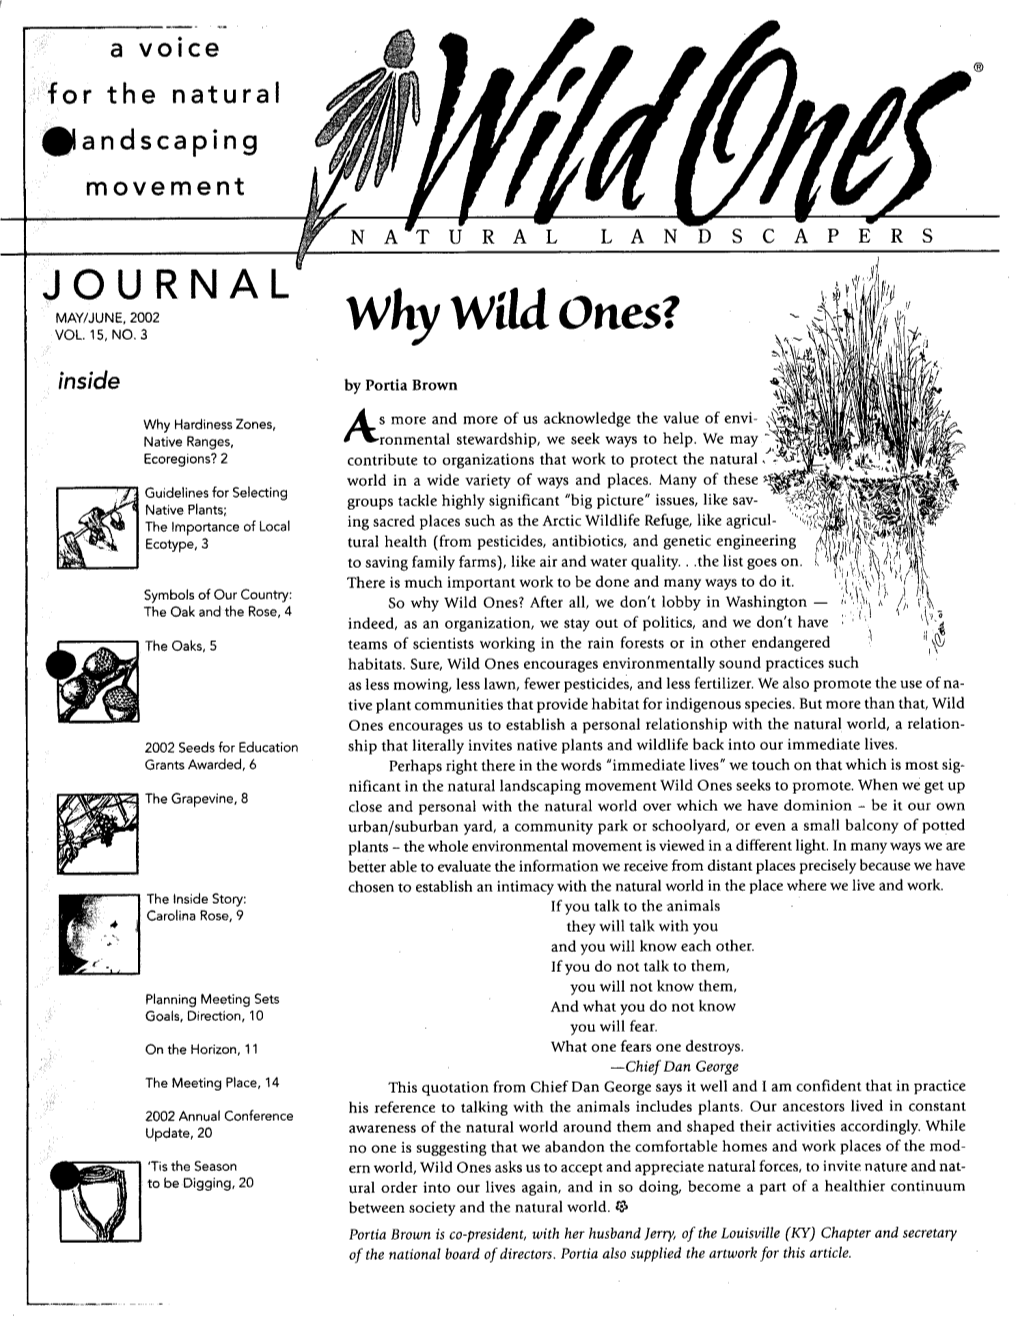 JOURNAL MAY/JUNE,2002 Why Wild Ones? Vol